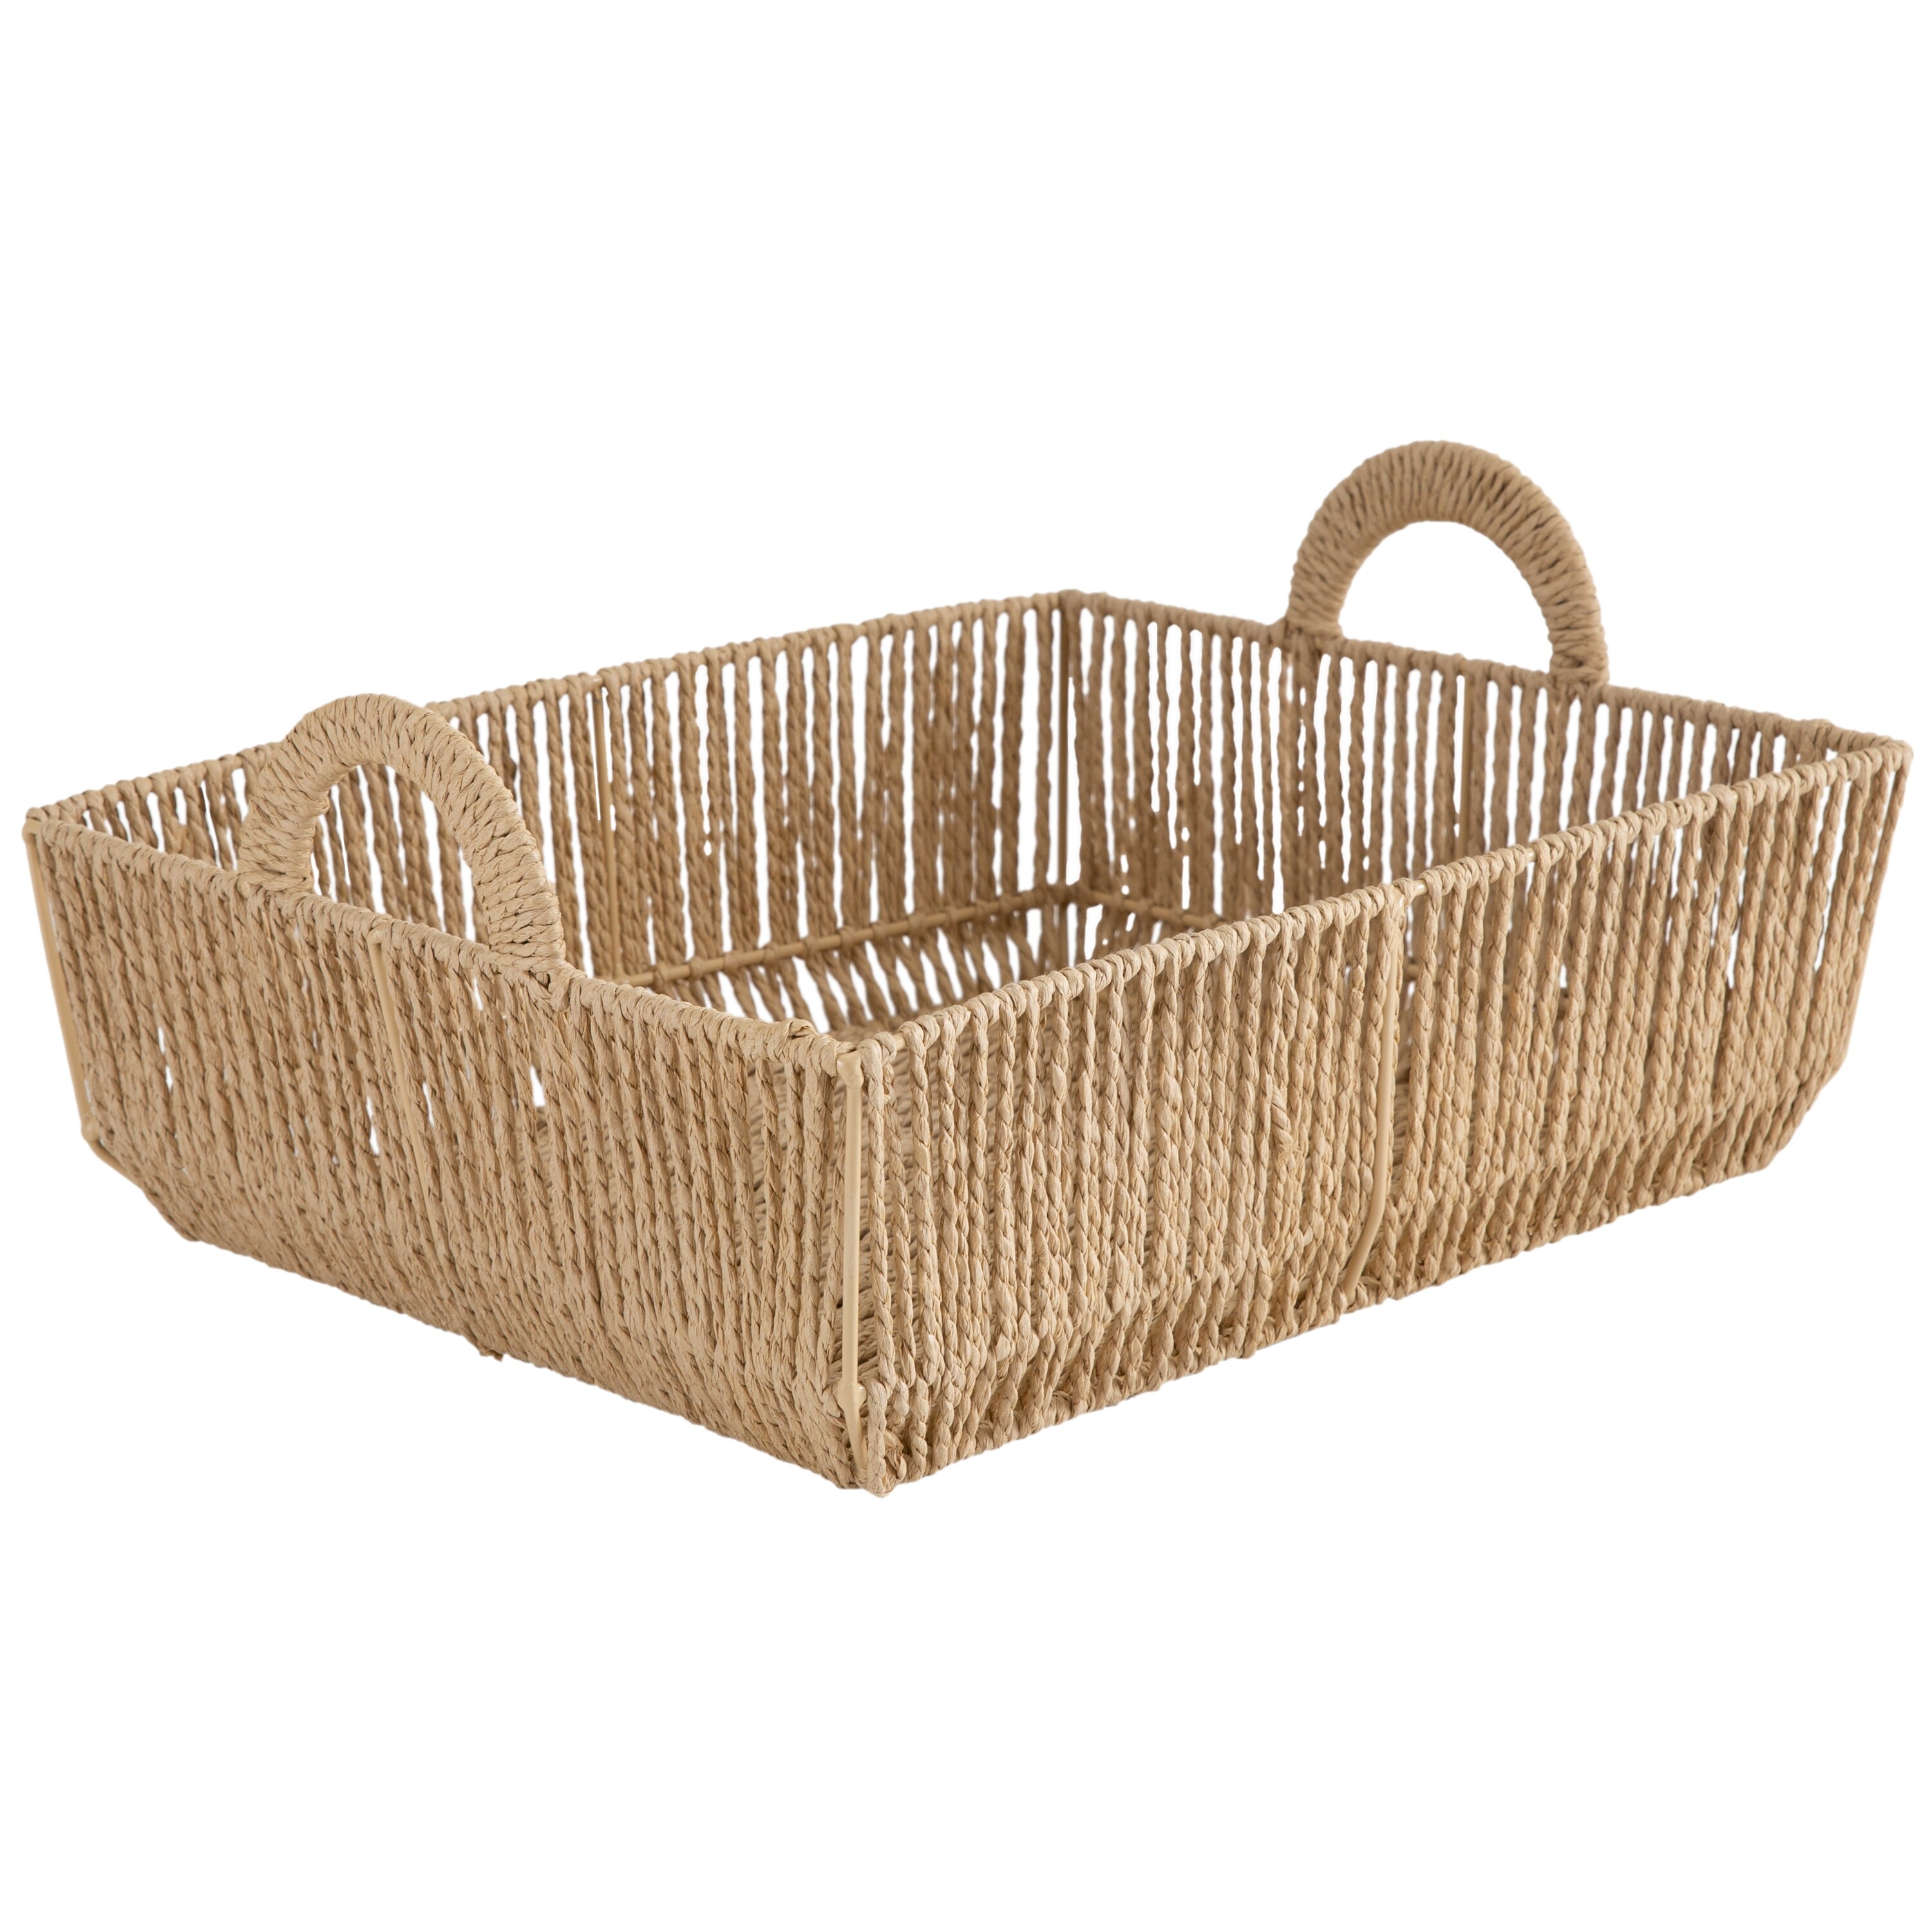 https://ak1.ostkcdn.com/images/products/is/images/direct/f74c010b83b794452bf5044704e4e726430fb9f0/Simplify-Dutch-Weave-Large-Storage-Basket-with-Round-Handles.jpg